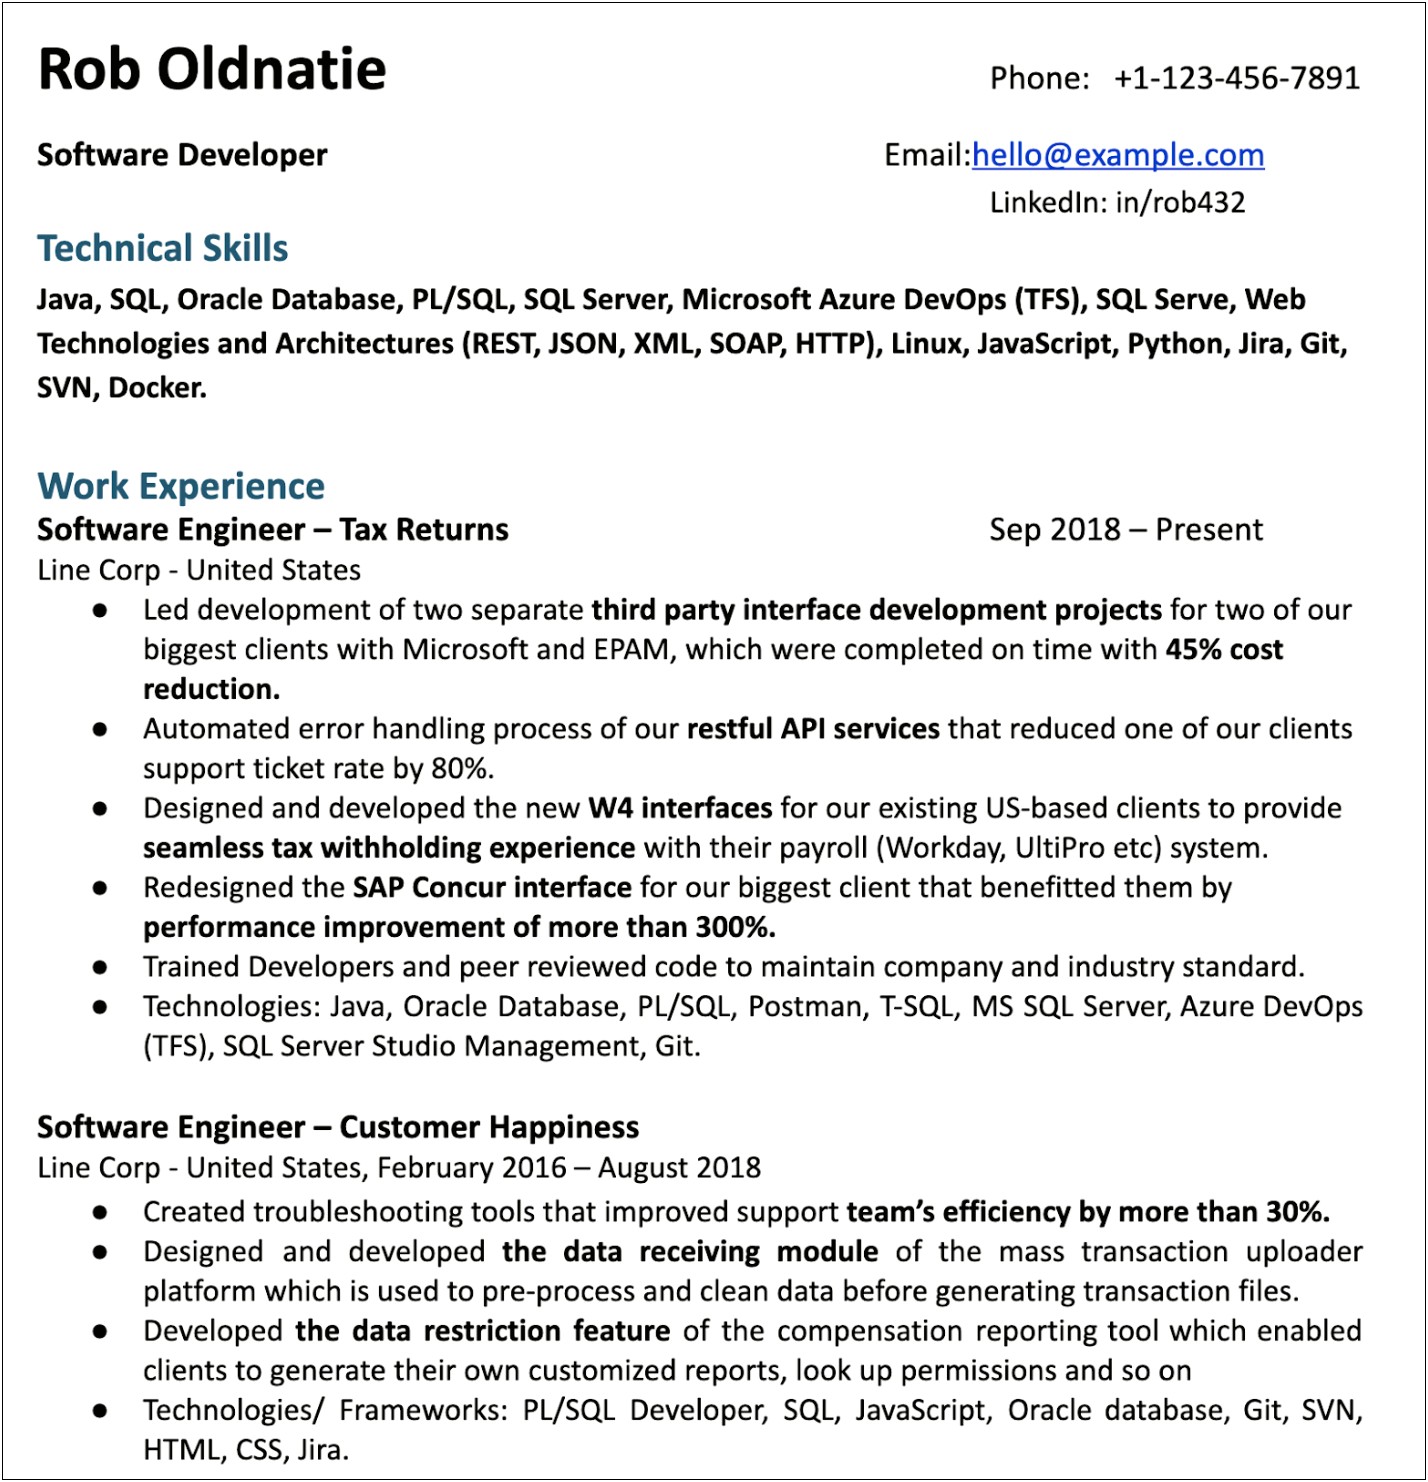 Typing Wrong Job Title On Resume